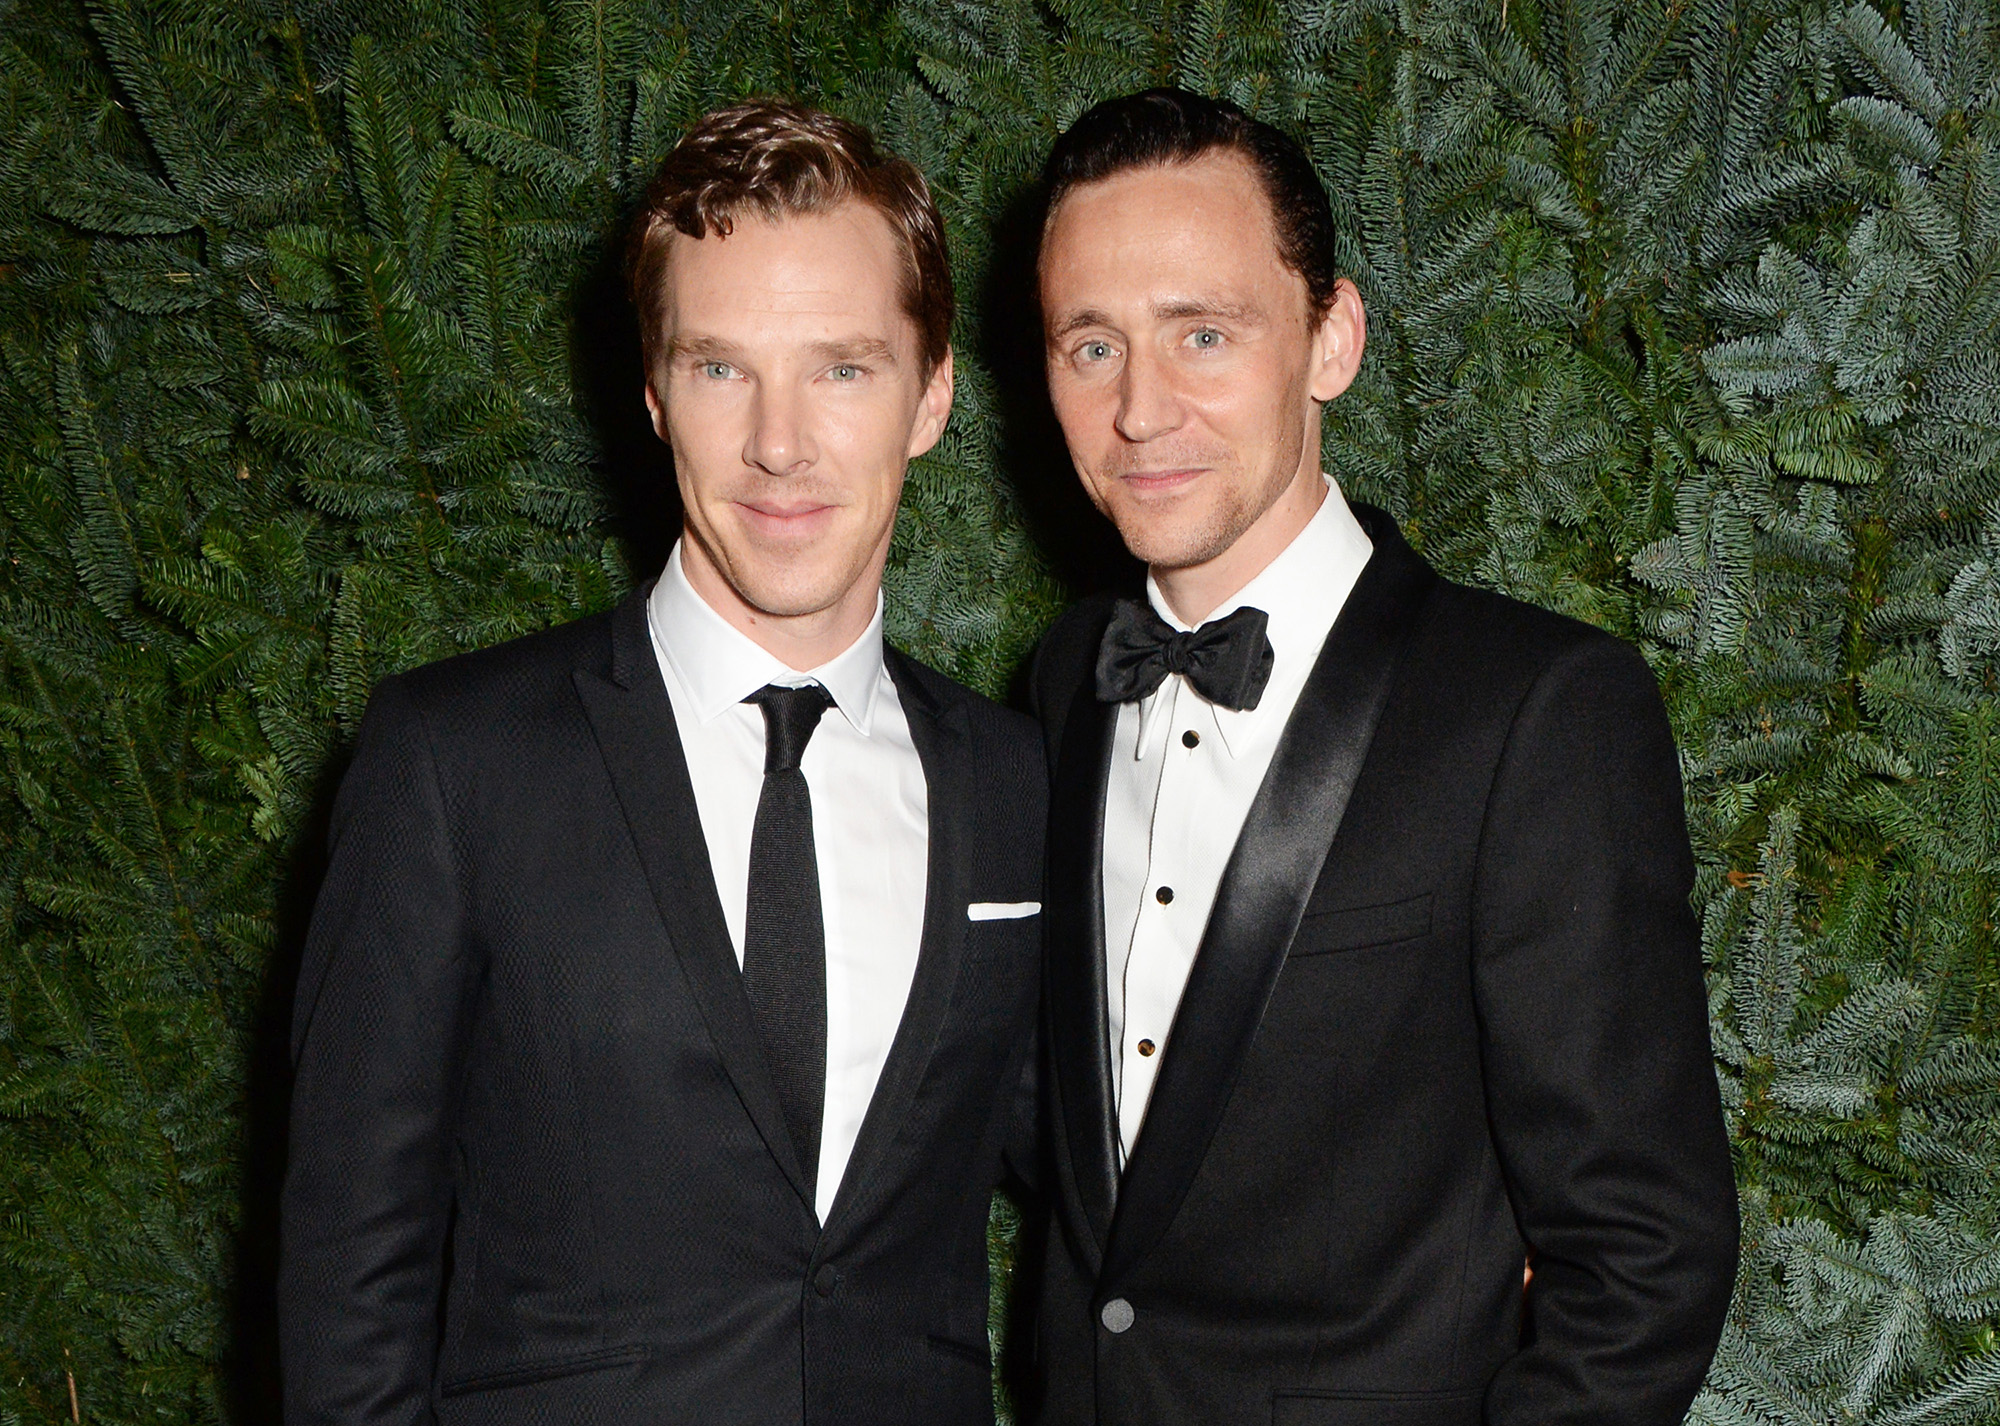 Benedict Cumberbatch and Tom Hiddleston attend a champagne reception at the 60th London Evening Standard Theatre Awards at the London Palladium on November 30, 2014 in London, England.  (Photo by David M. Benett/Getty Images) (David M. Benett&mdash;Getty Images)